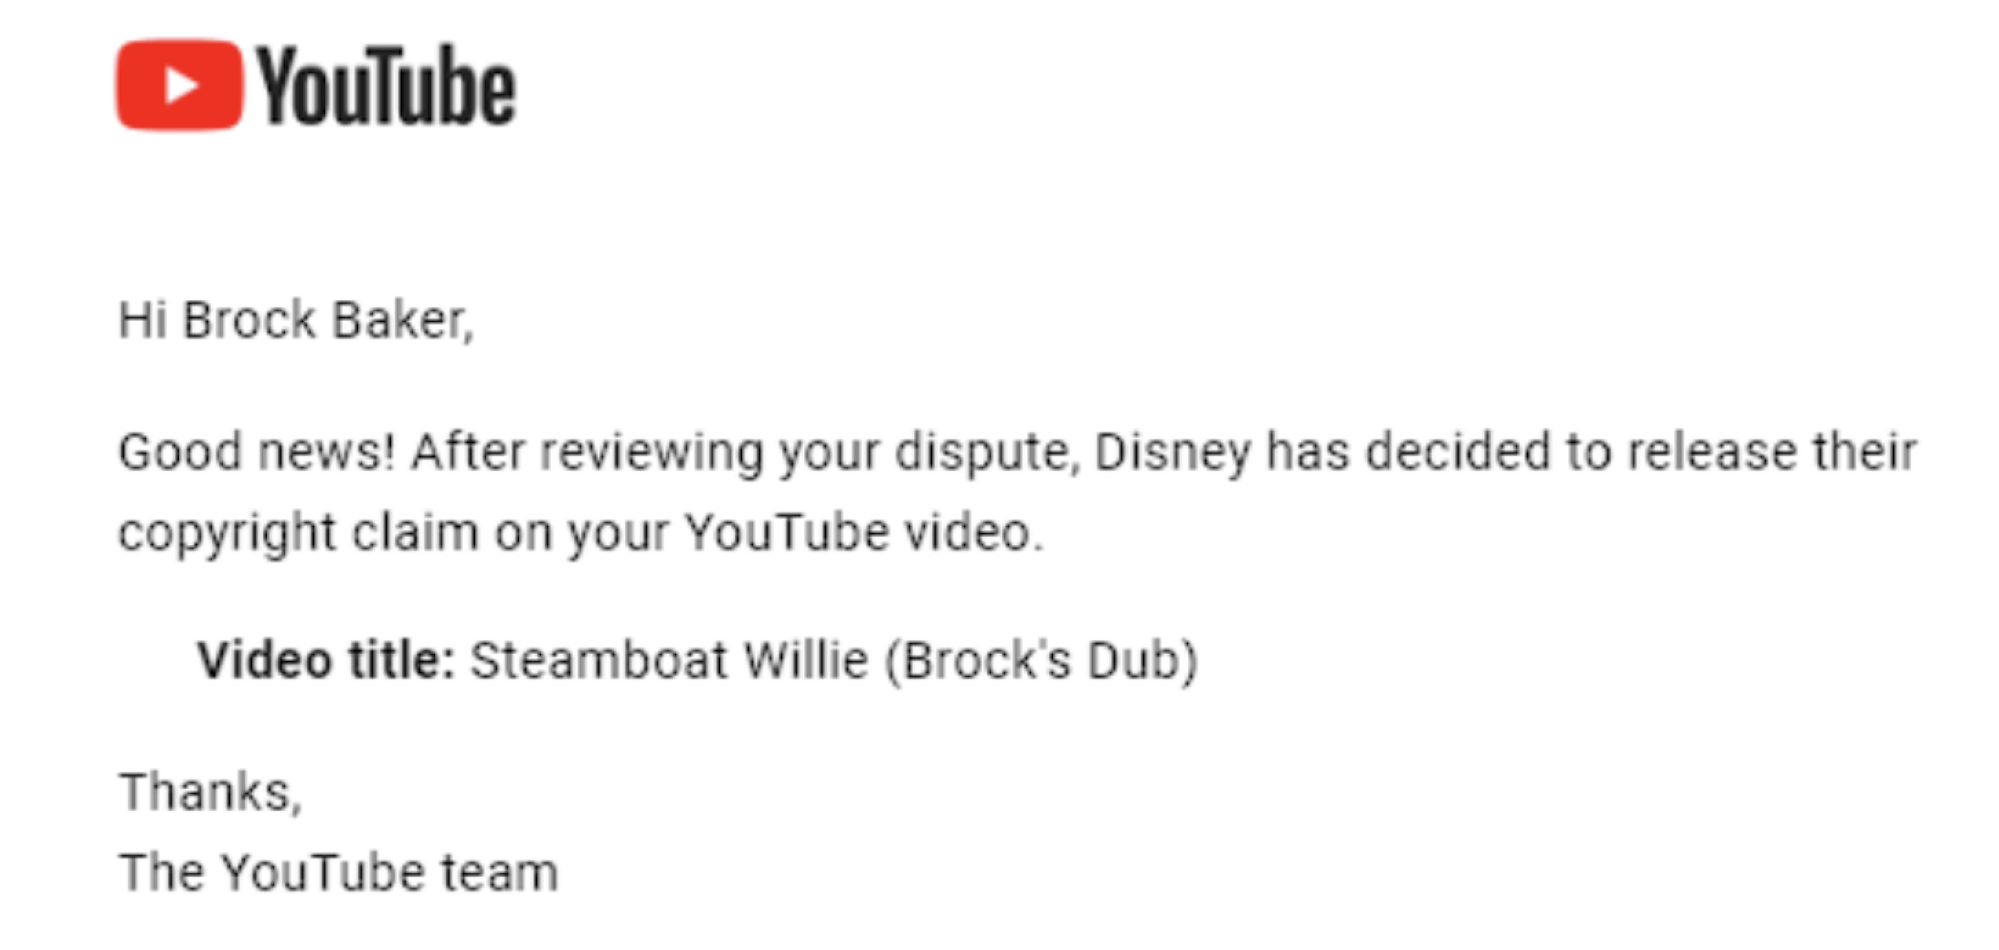 Disney releases "Steamboat Willie" copyright claim